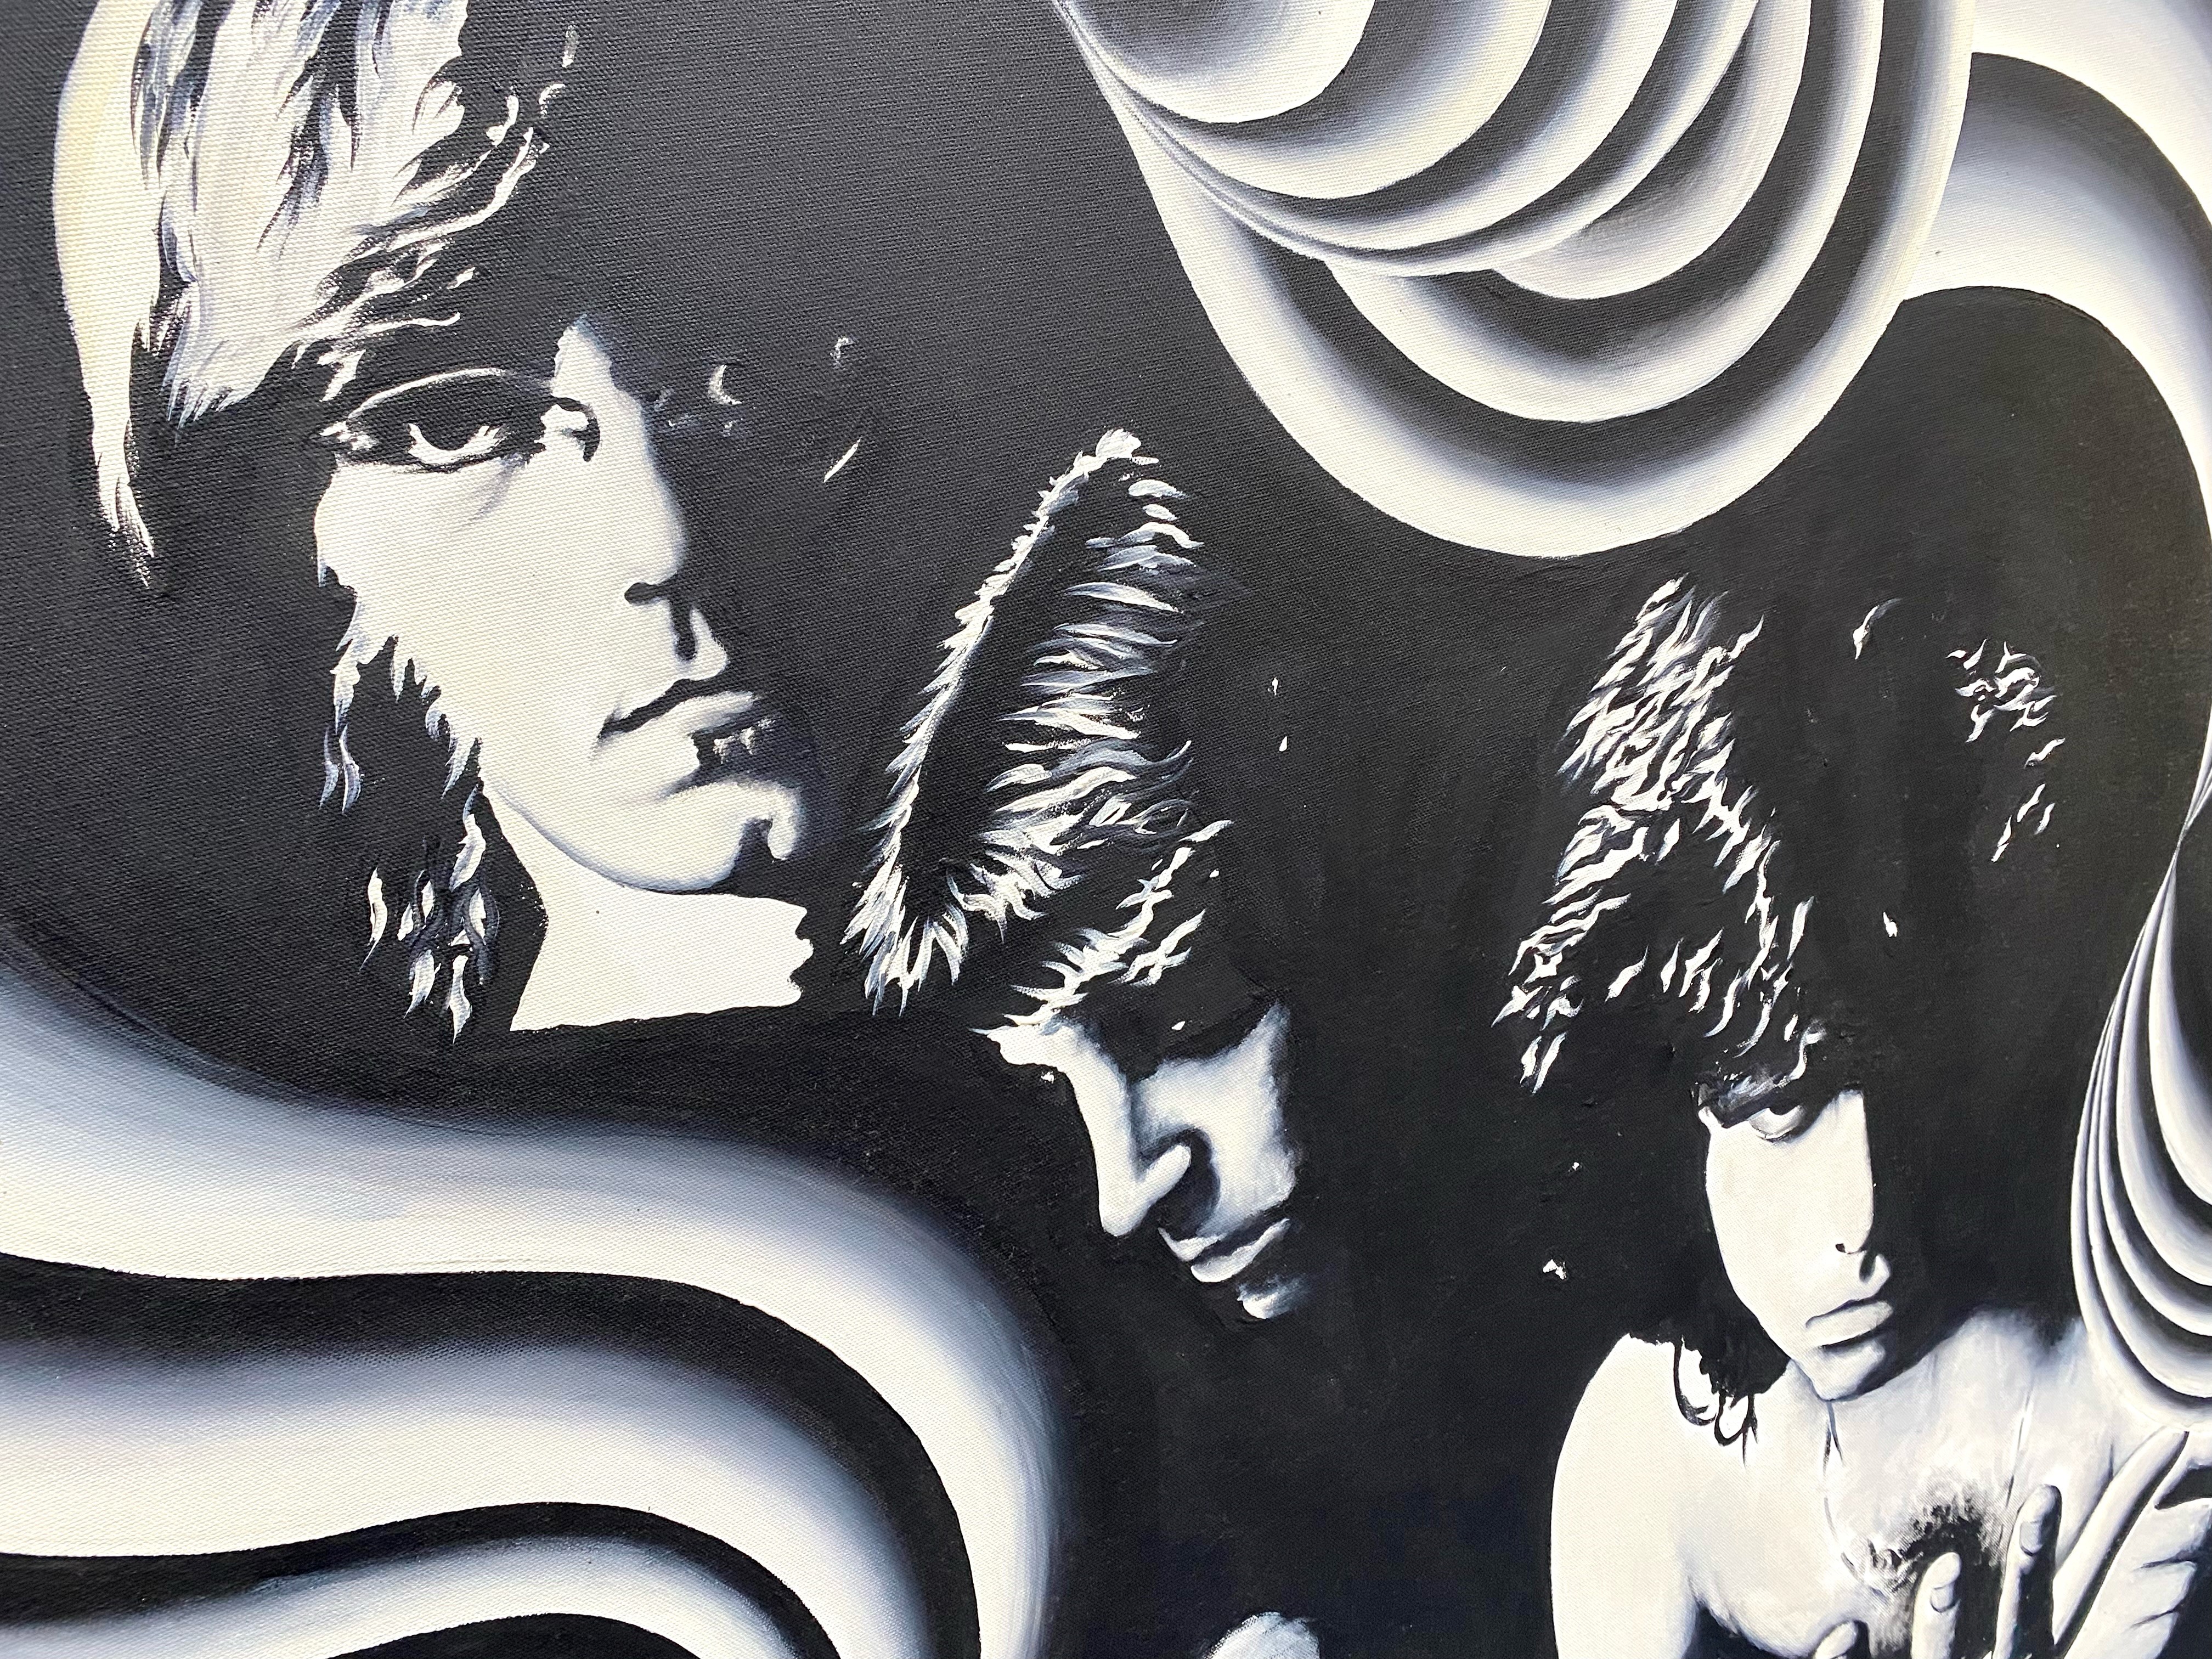 Large Black & White Original Painting Of The Doors By OBZ - This was gifted to the current vendor on - Image 2 of 2